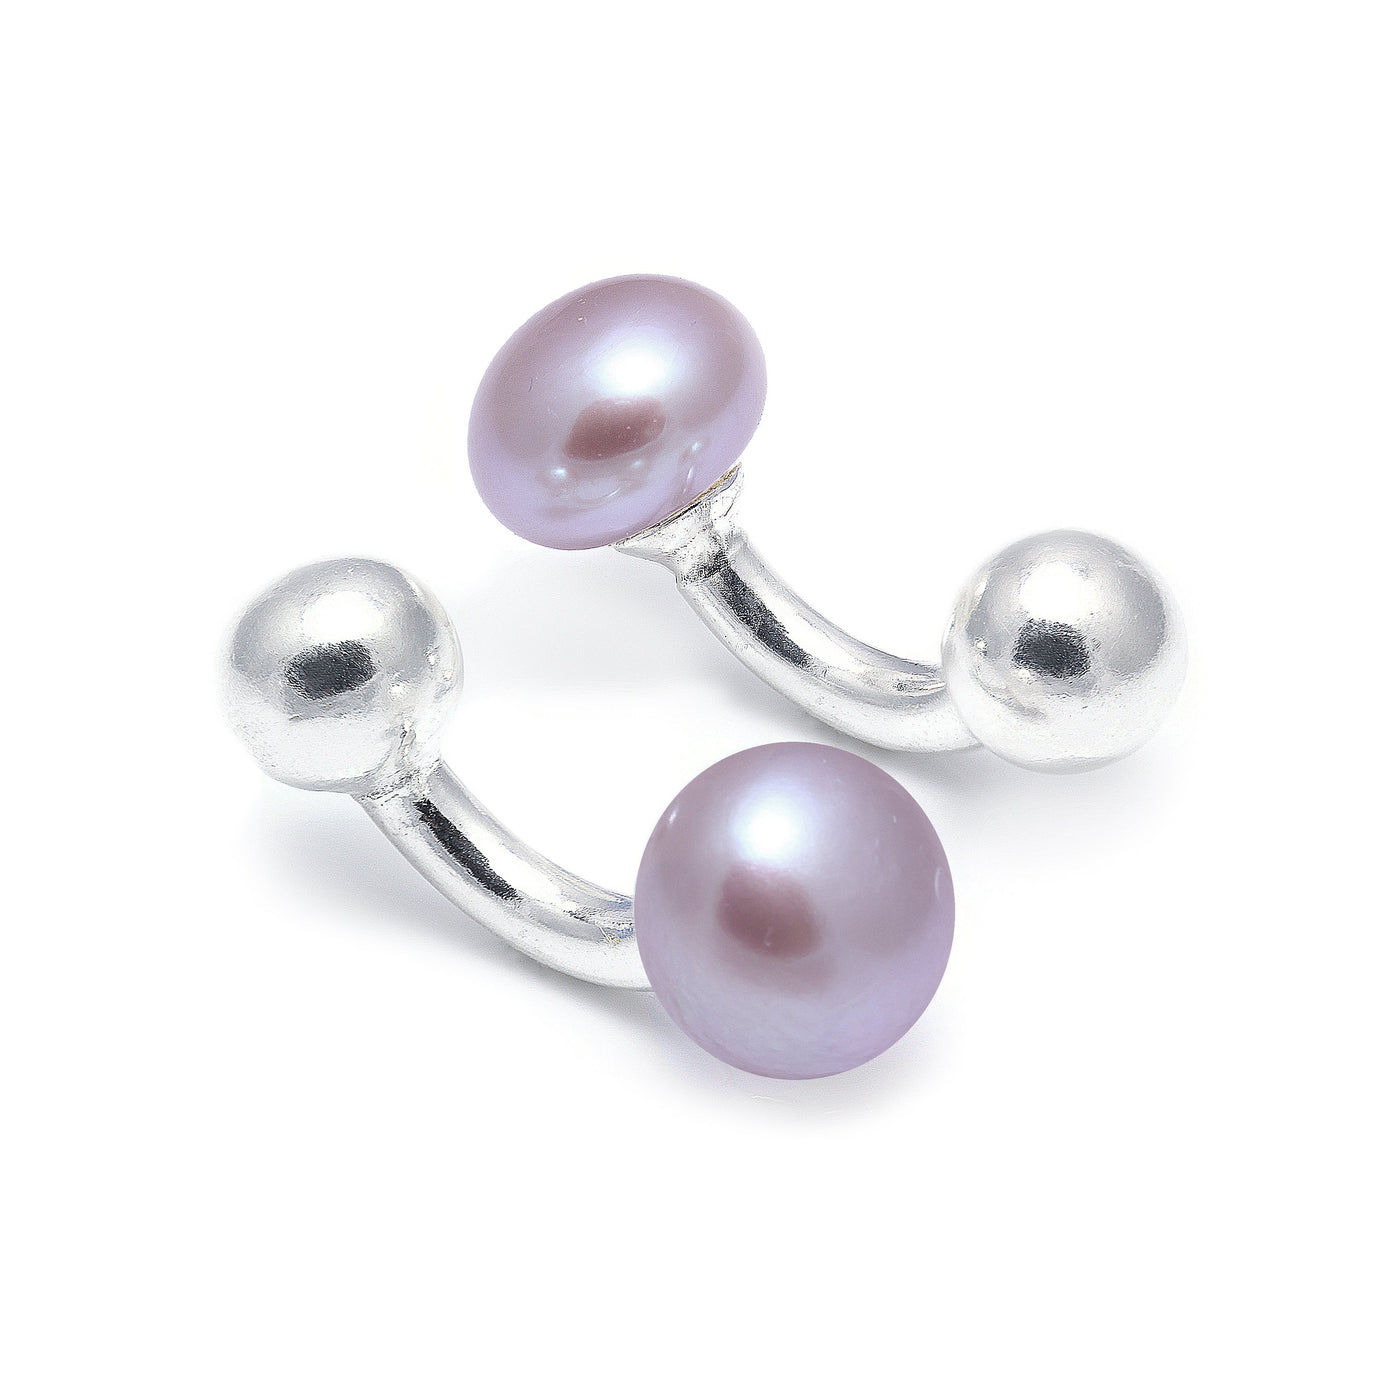 10mm Pink Freshwater Pearl Button Sterling Silver Cufflinks